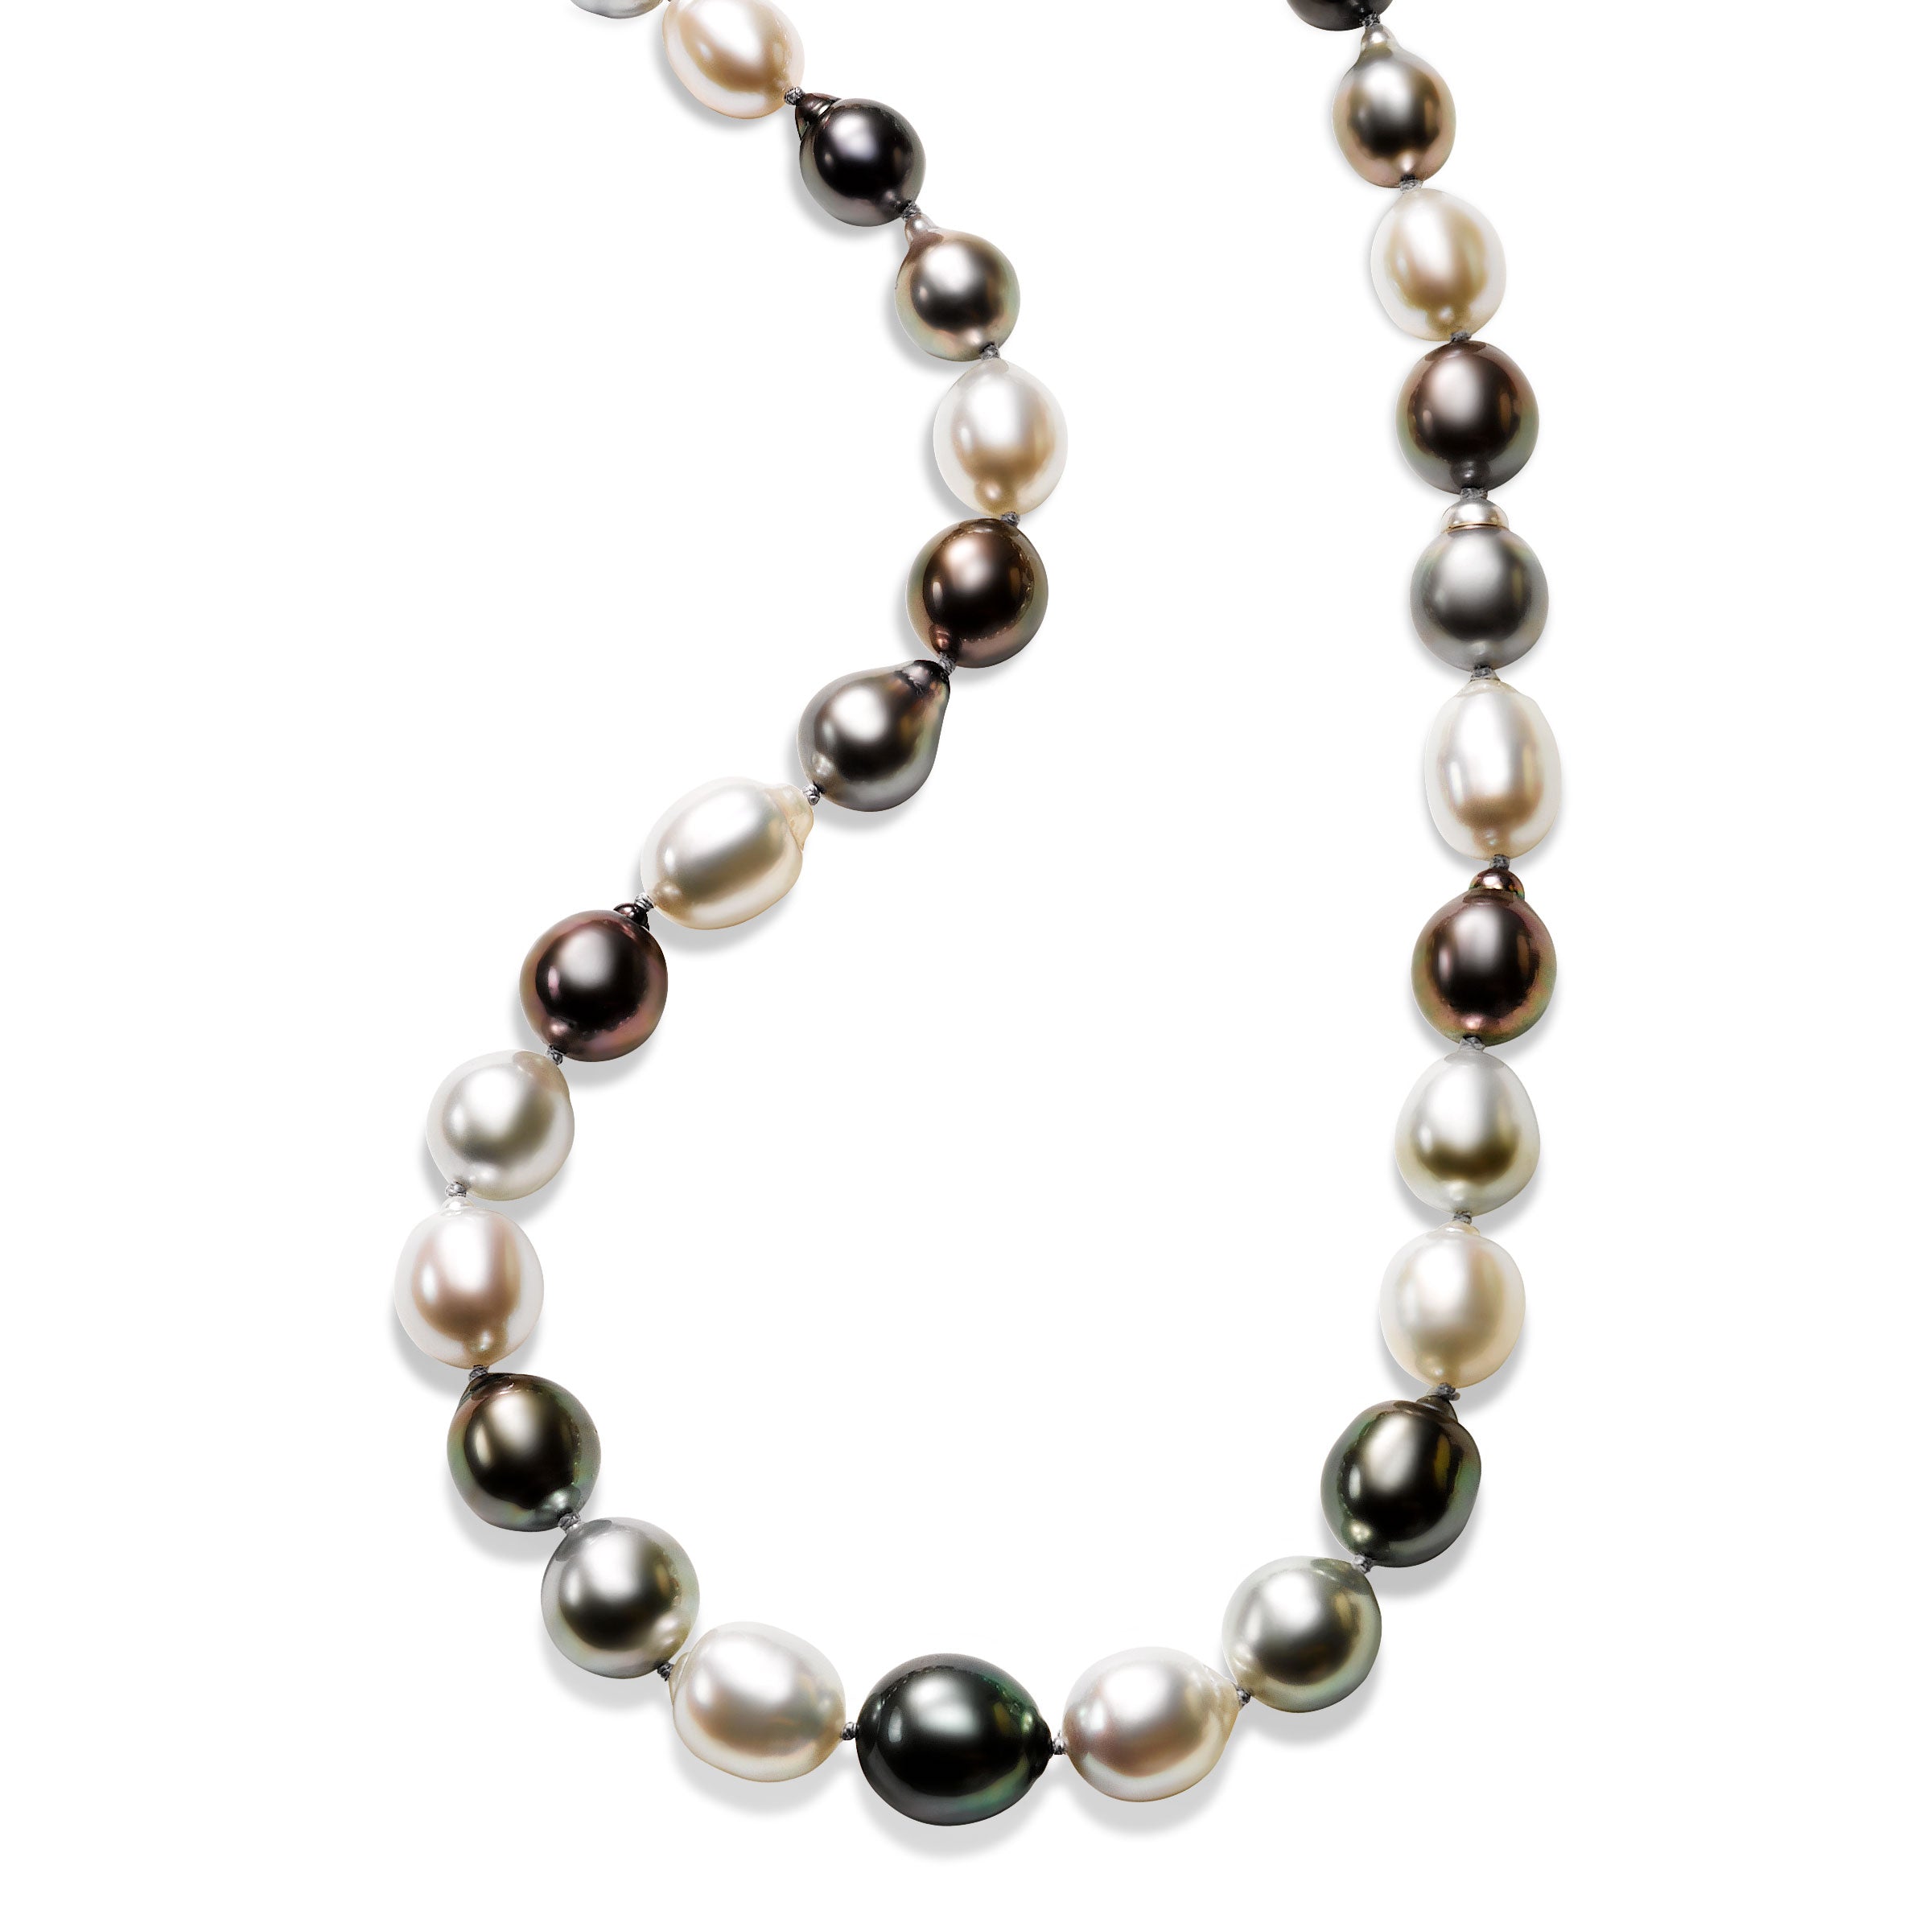 12.0-13.0mm Black Cultured Tahitian Pearl Necklace in Sterling Silver - 20